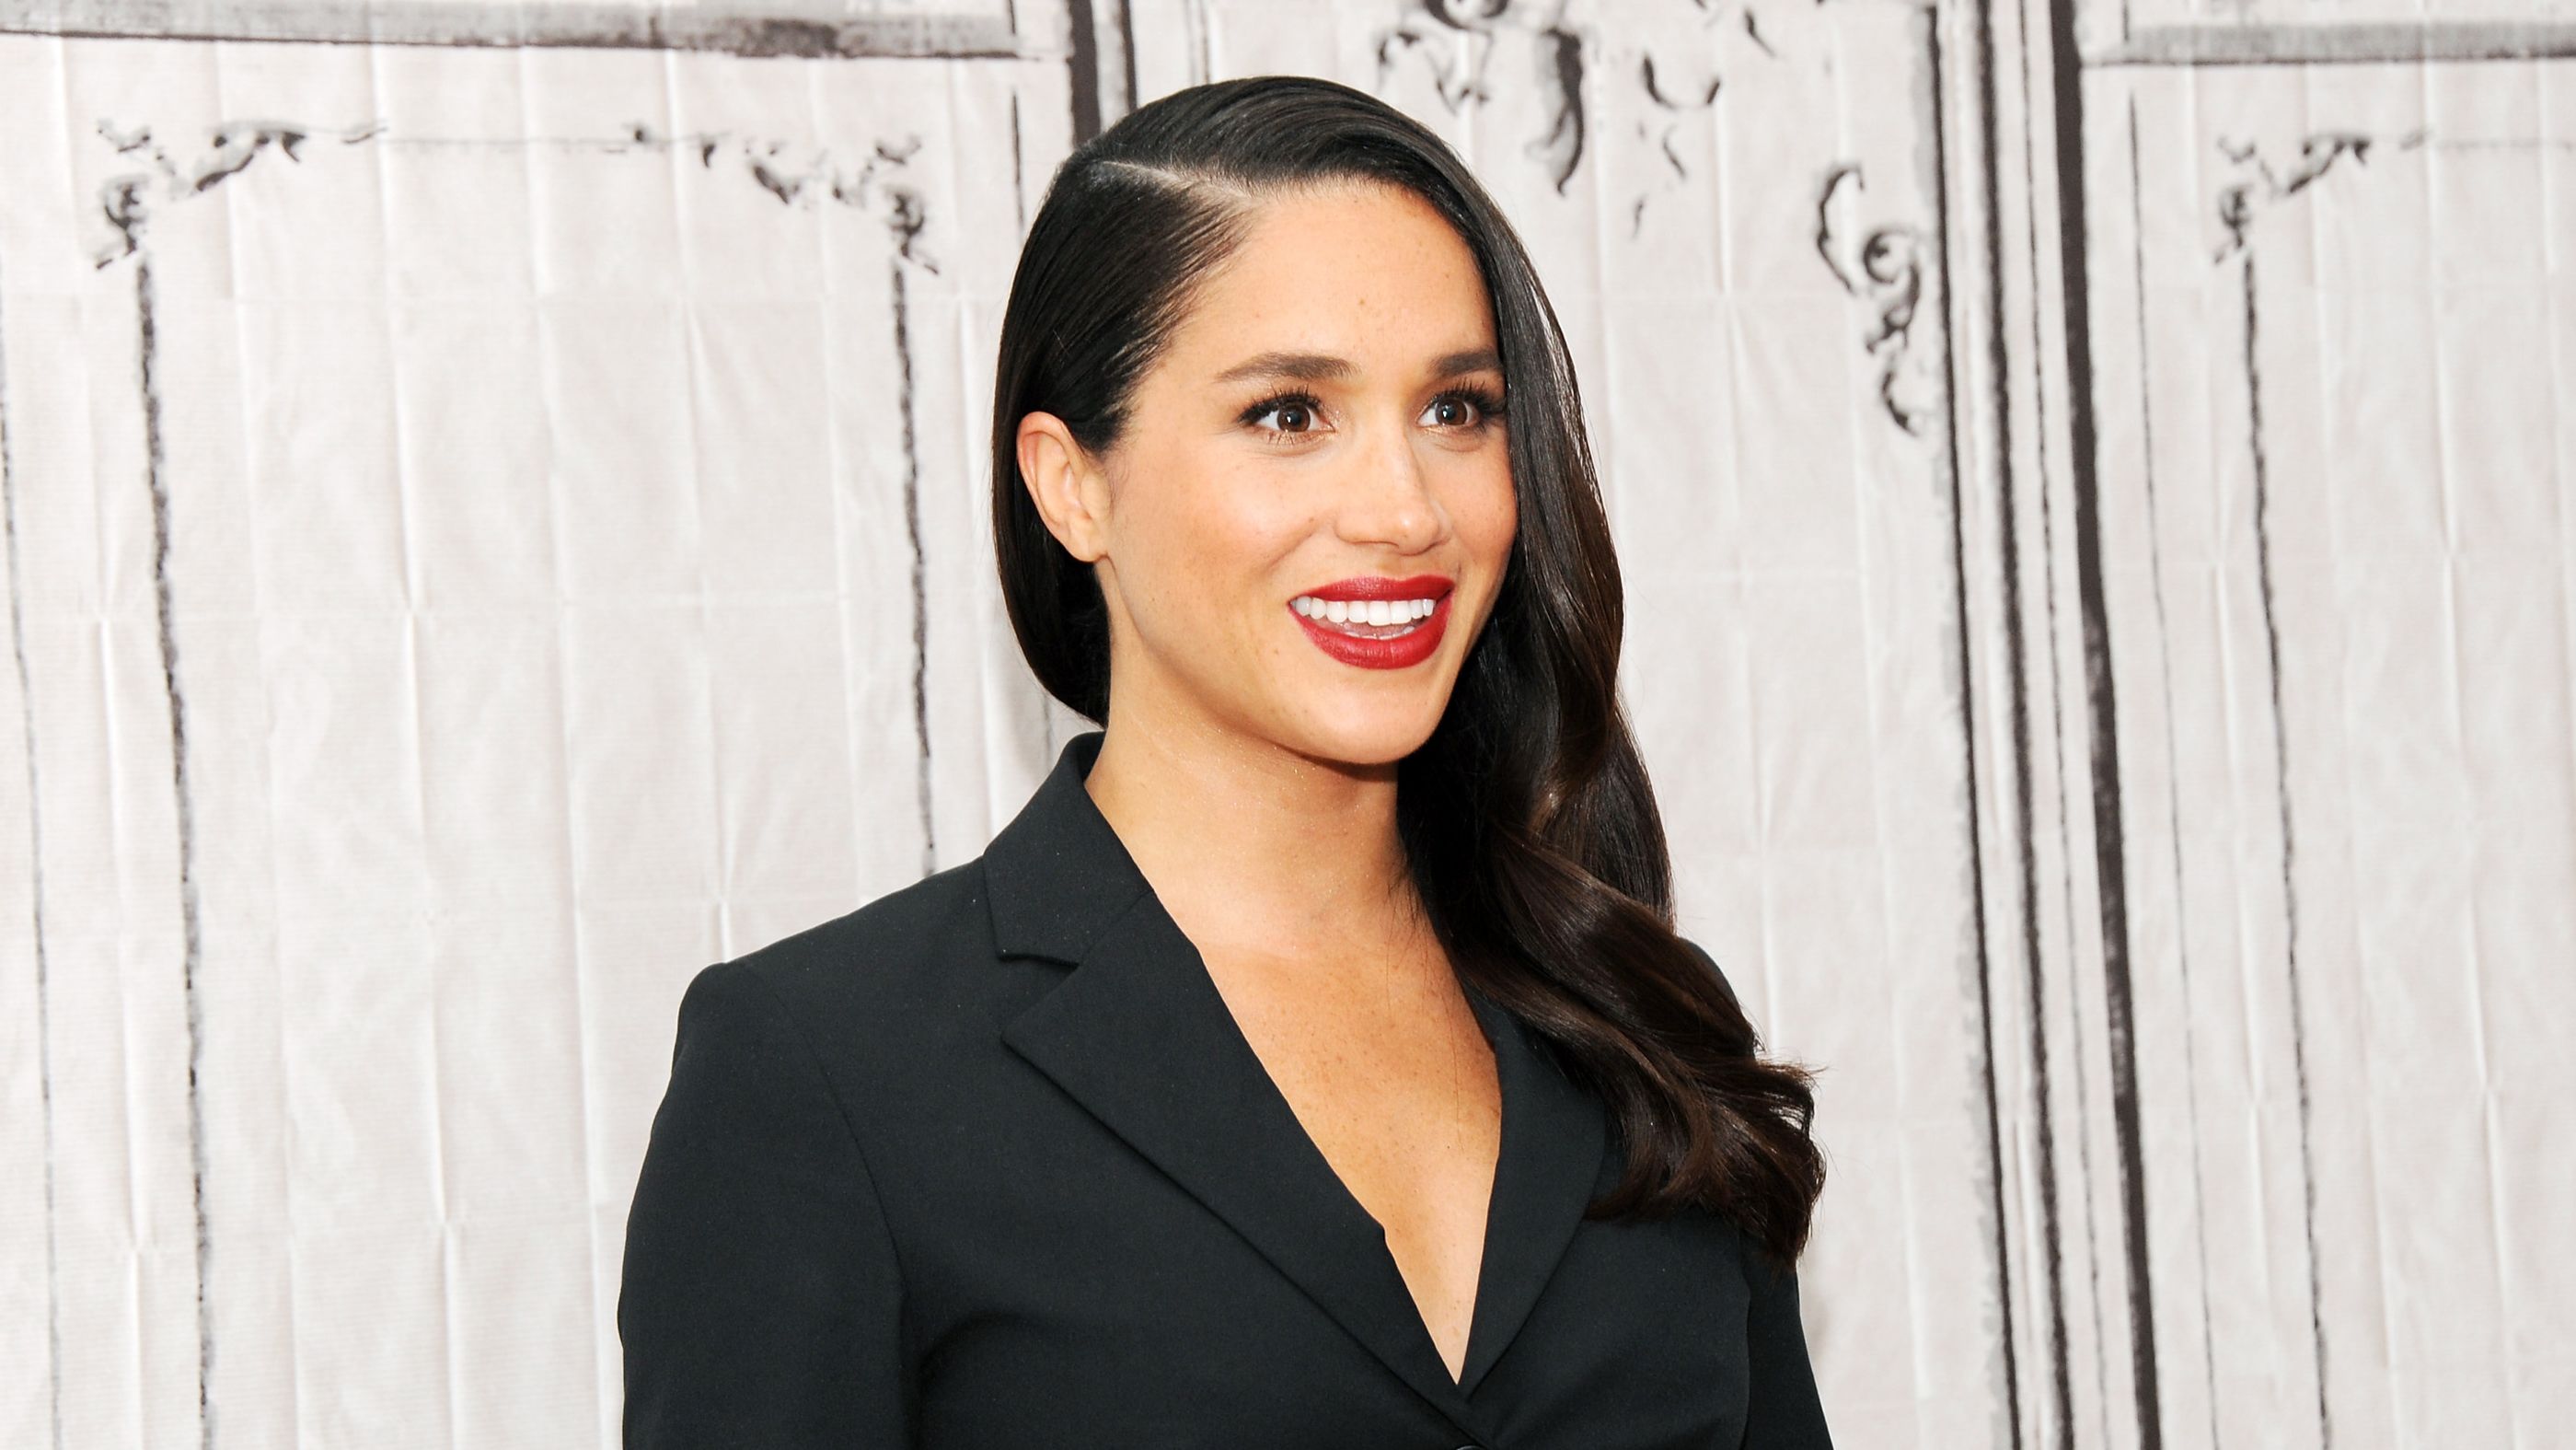 Meghan Markle at AOL Studios in New York on March 17, 2016.